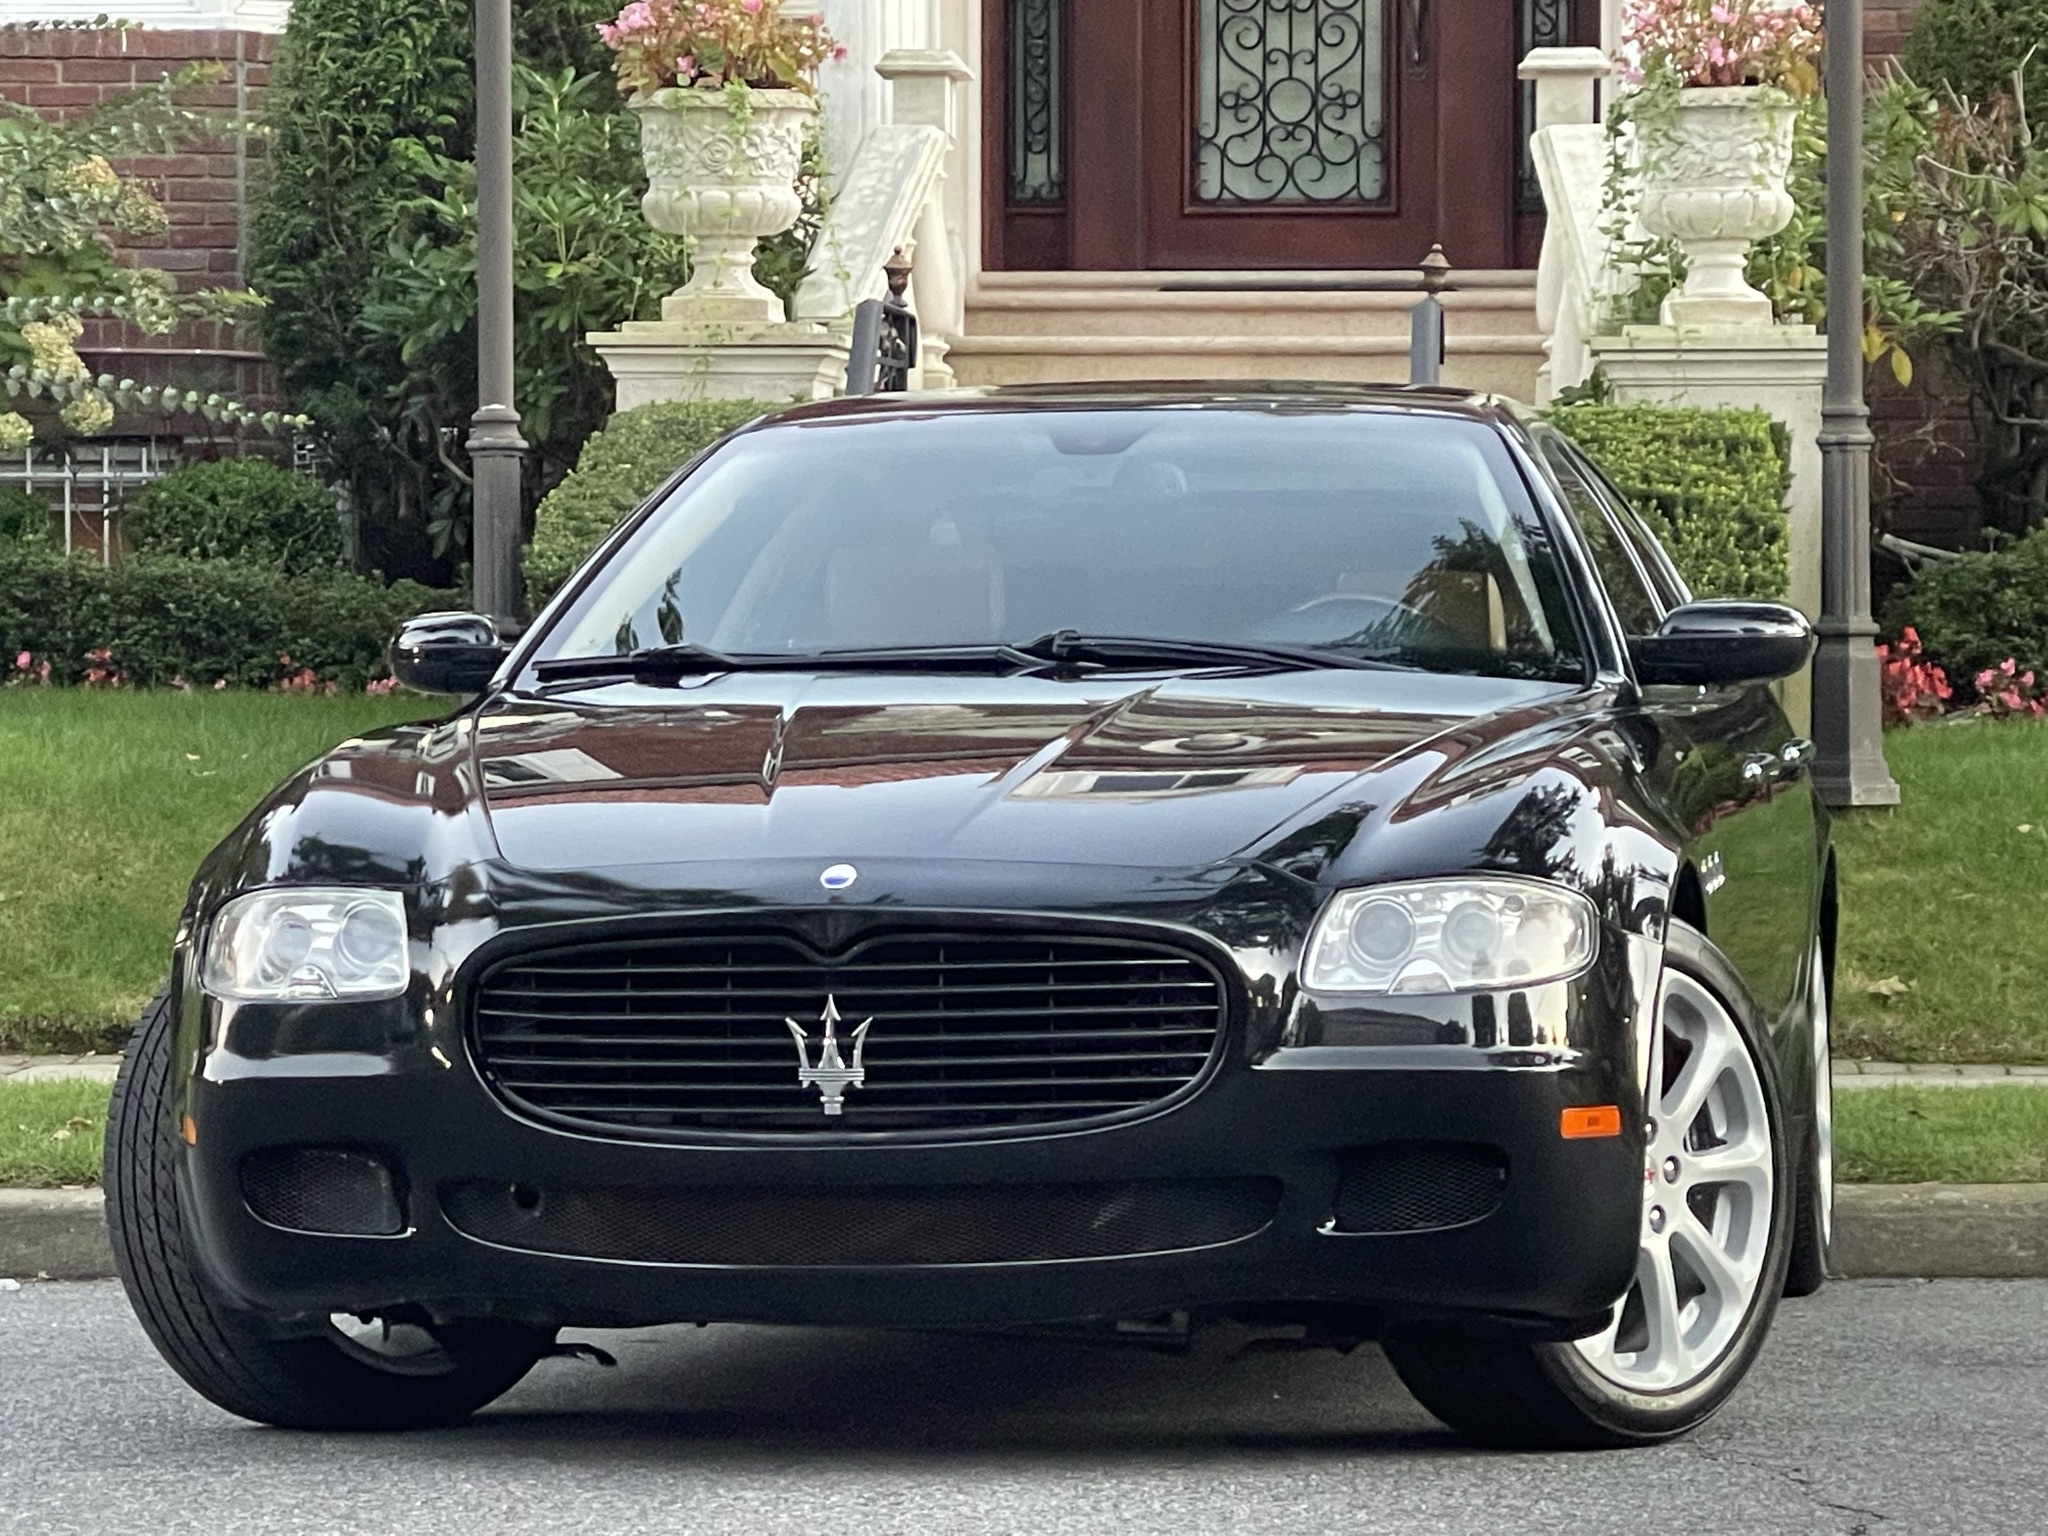 Buy Used 2006 MASERATI QUATTROPORTE M139 SPORT GT F1 for $19 900 from  trusted dealer in Brooklyn, NY!